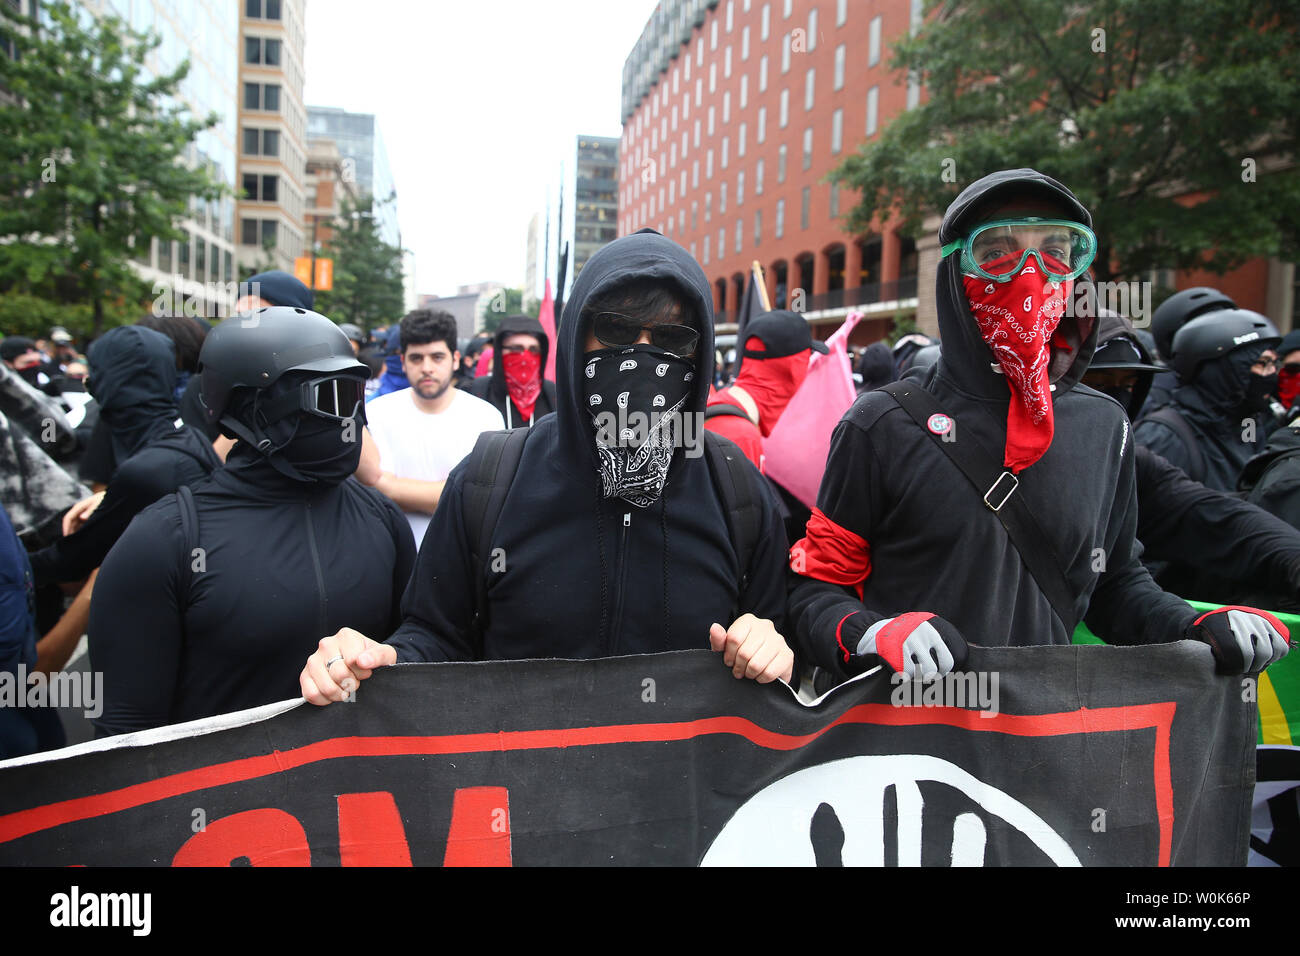 Groups crossing the political spectrum demonstrate in Washington, D.C. on August 12, 2018. Groups of White supremacists, neo-nazis, the alt-right, antifa and their counterprotesters are marching in the nation's capital on the one-year anniversary of a white nationalist rally in Charlottesville, Virginia, that left one woman dead and dozens injured.   Photo by Tasos Katopodis/UPI Stock Photo